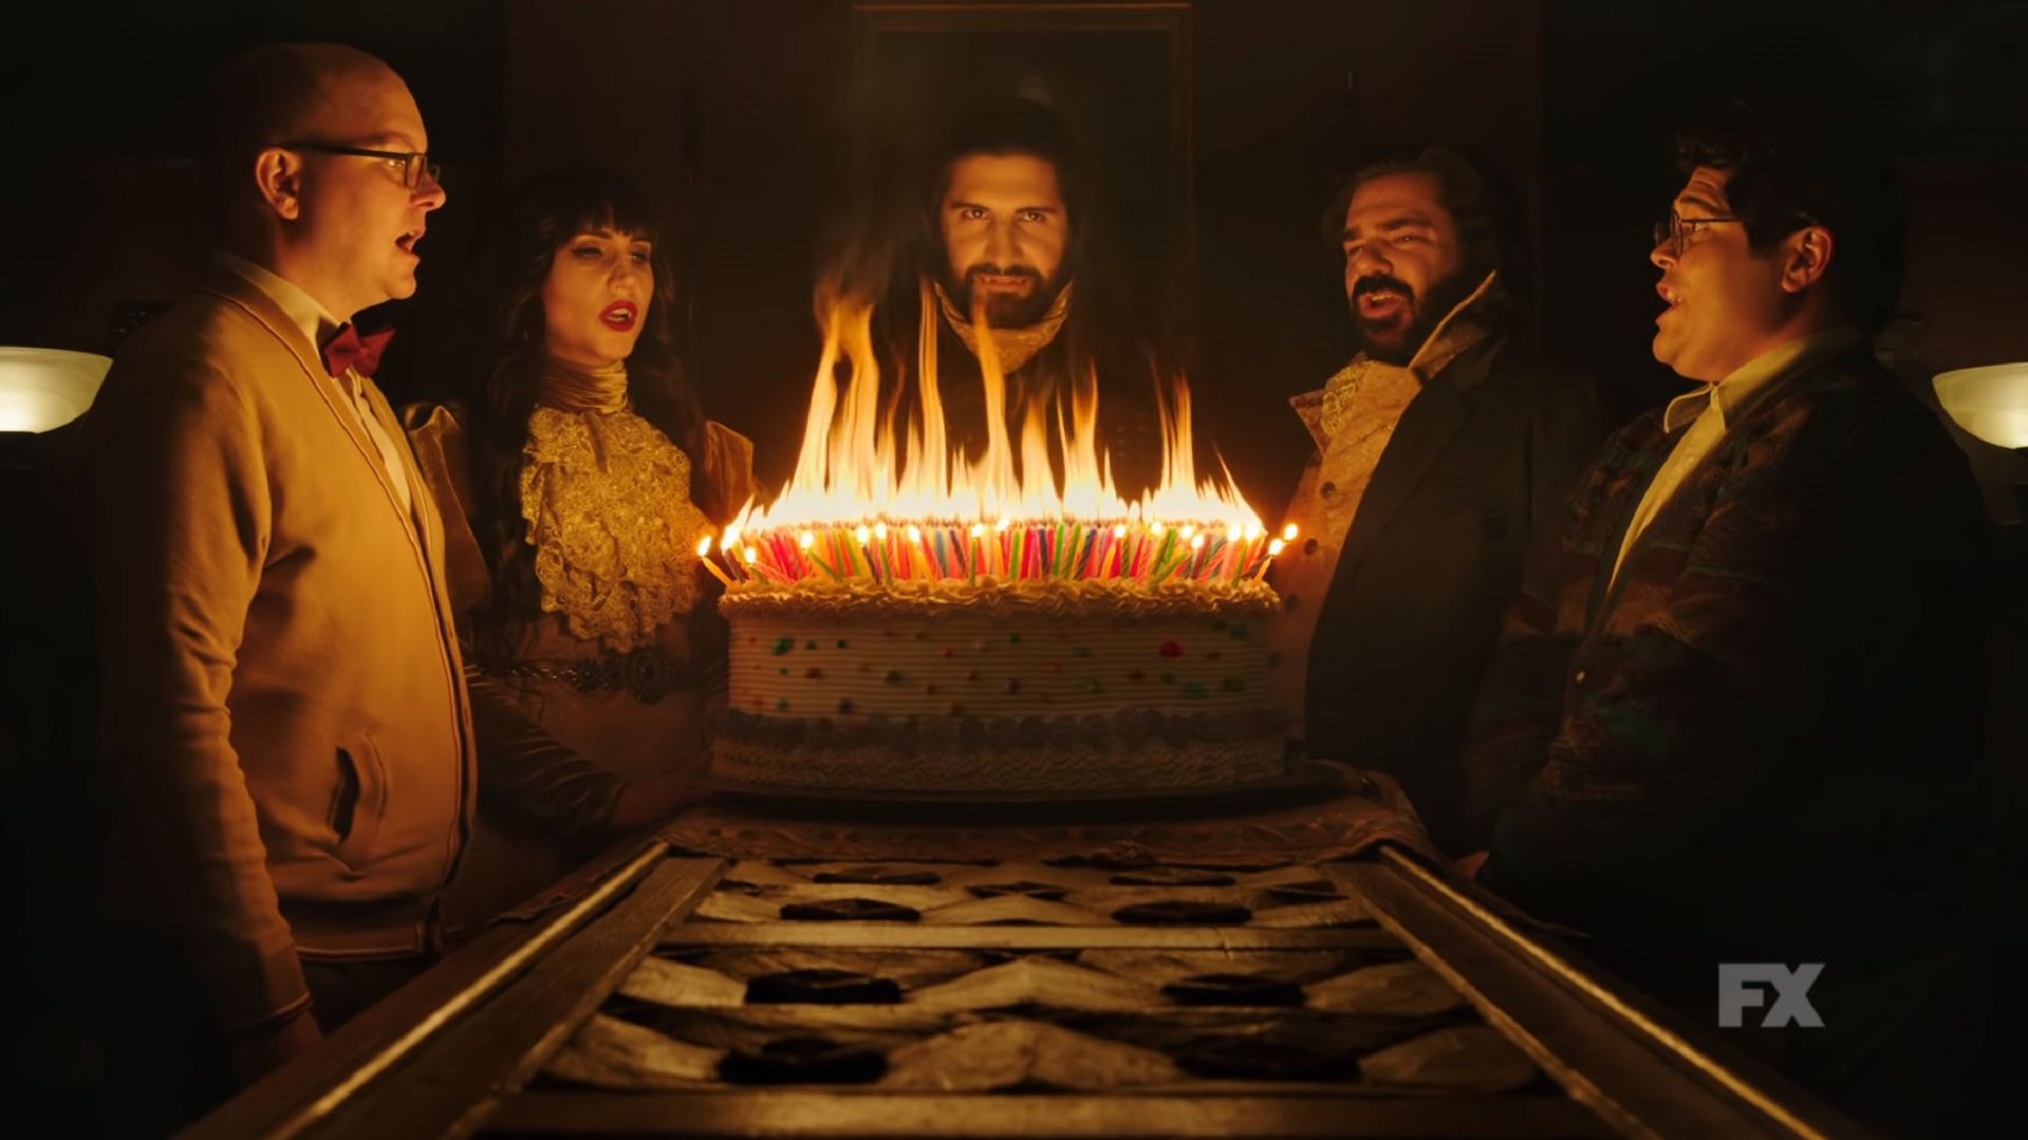 what we do in the shadows march.